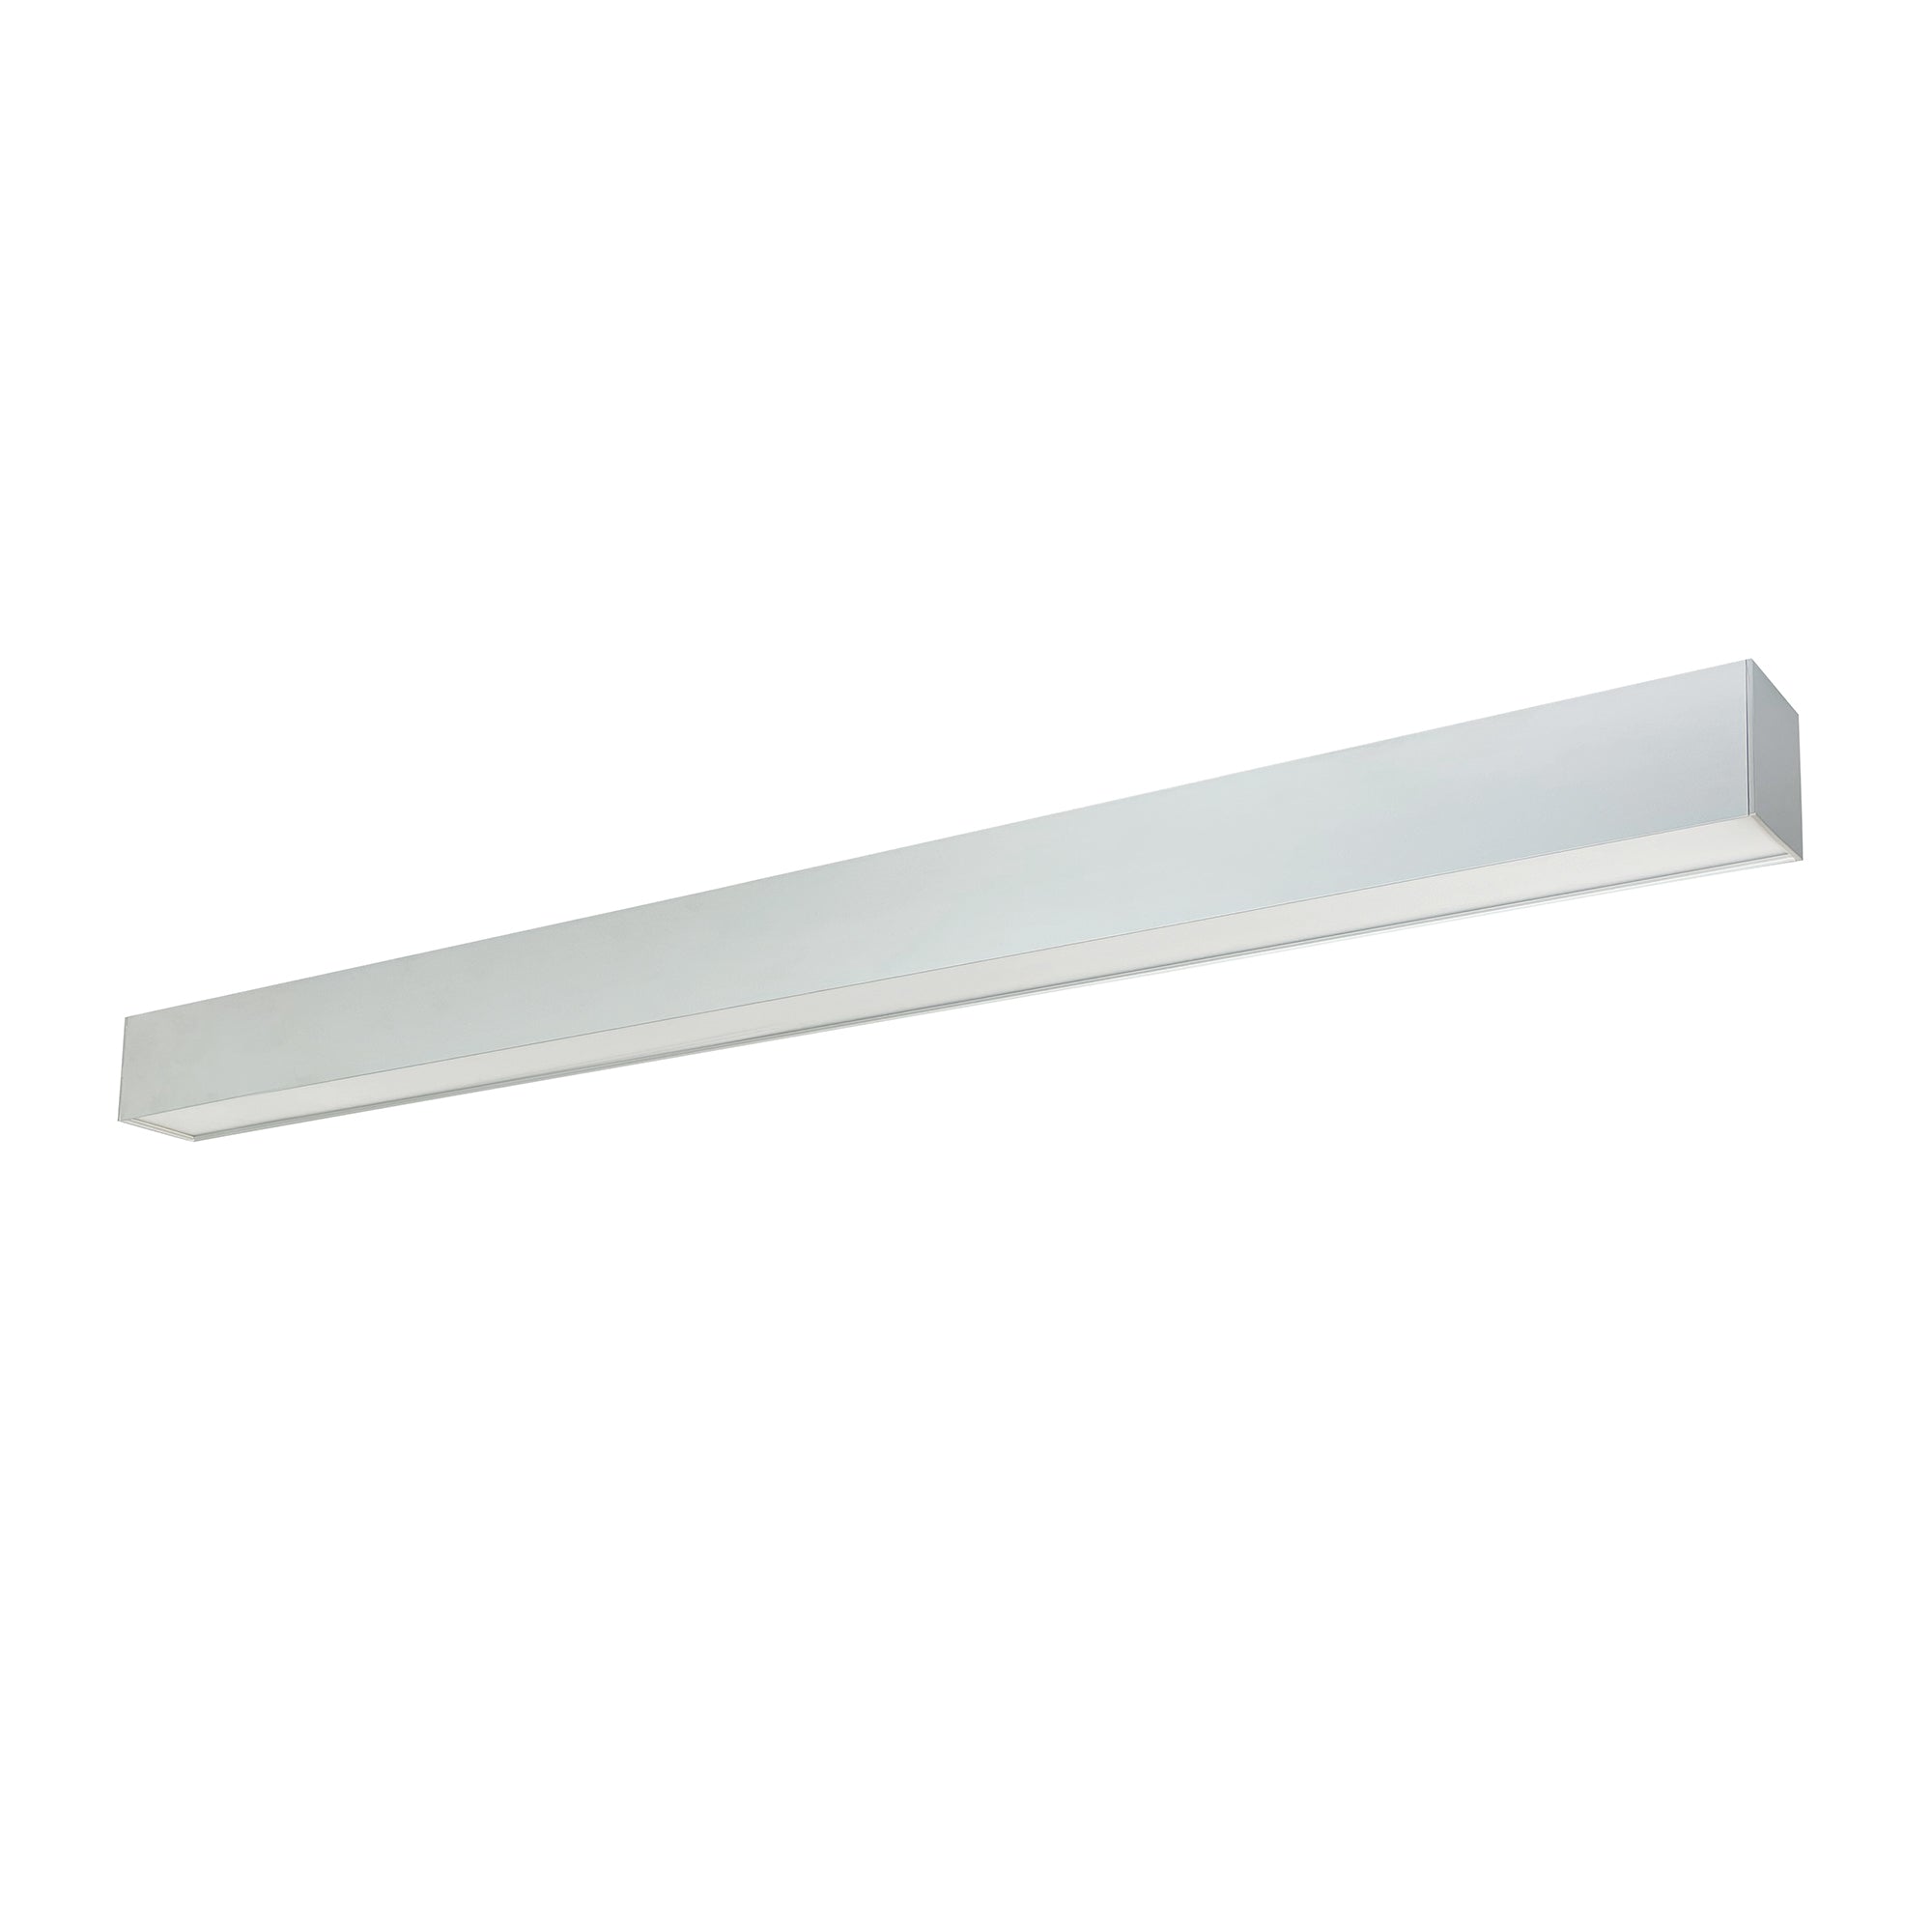 Nora Lighting NLUD-8334A/EM - Linear - 8' L-Line LED Indirect/Direct Linear, 12304lm / Selectable CCT, Aluminum Finish, with EM